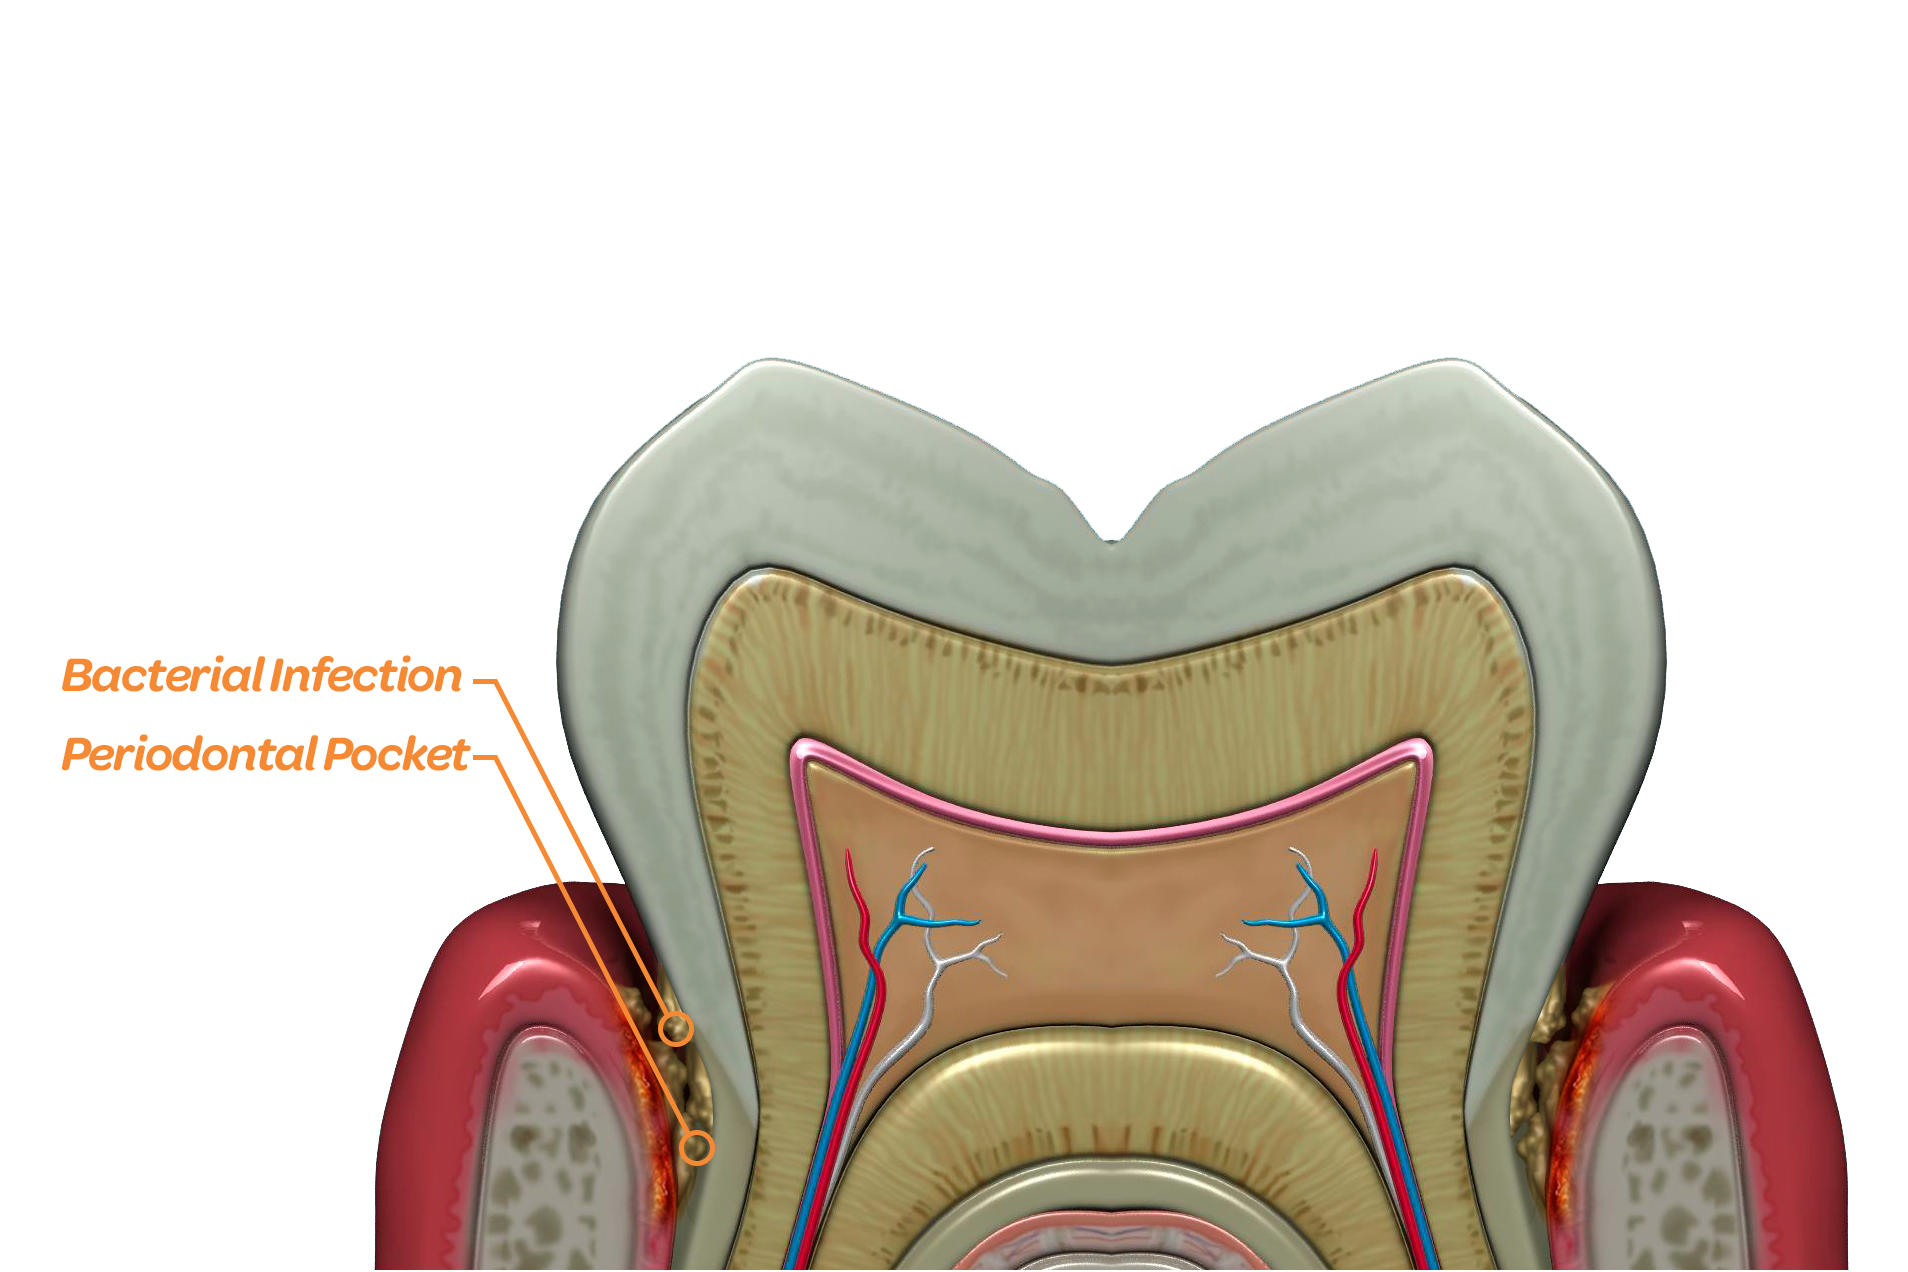 Bacteria that causes gum disease gathers in periodontal pockets below the gum line.